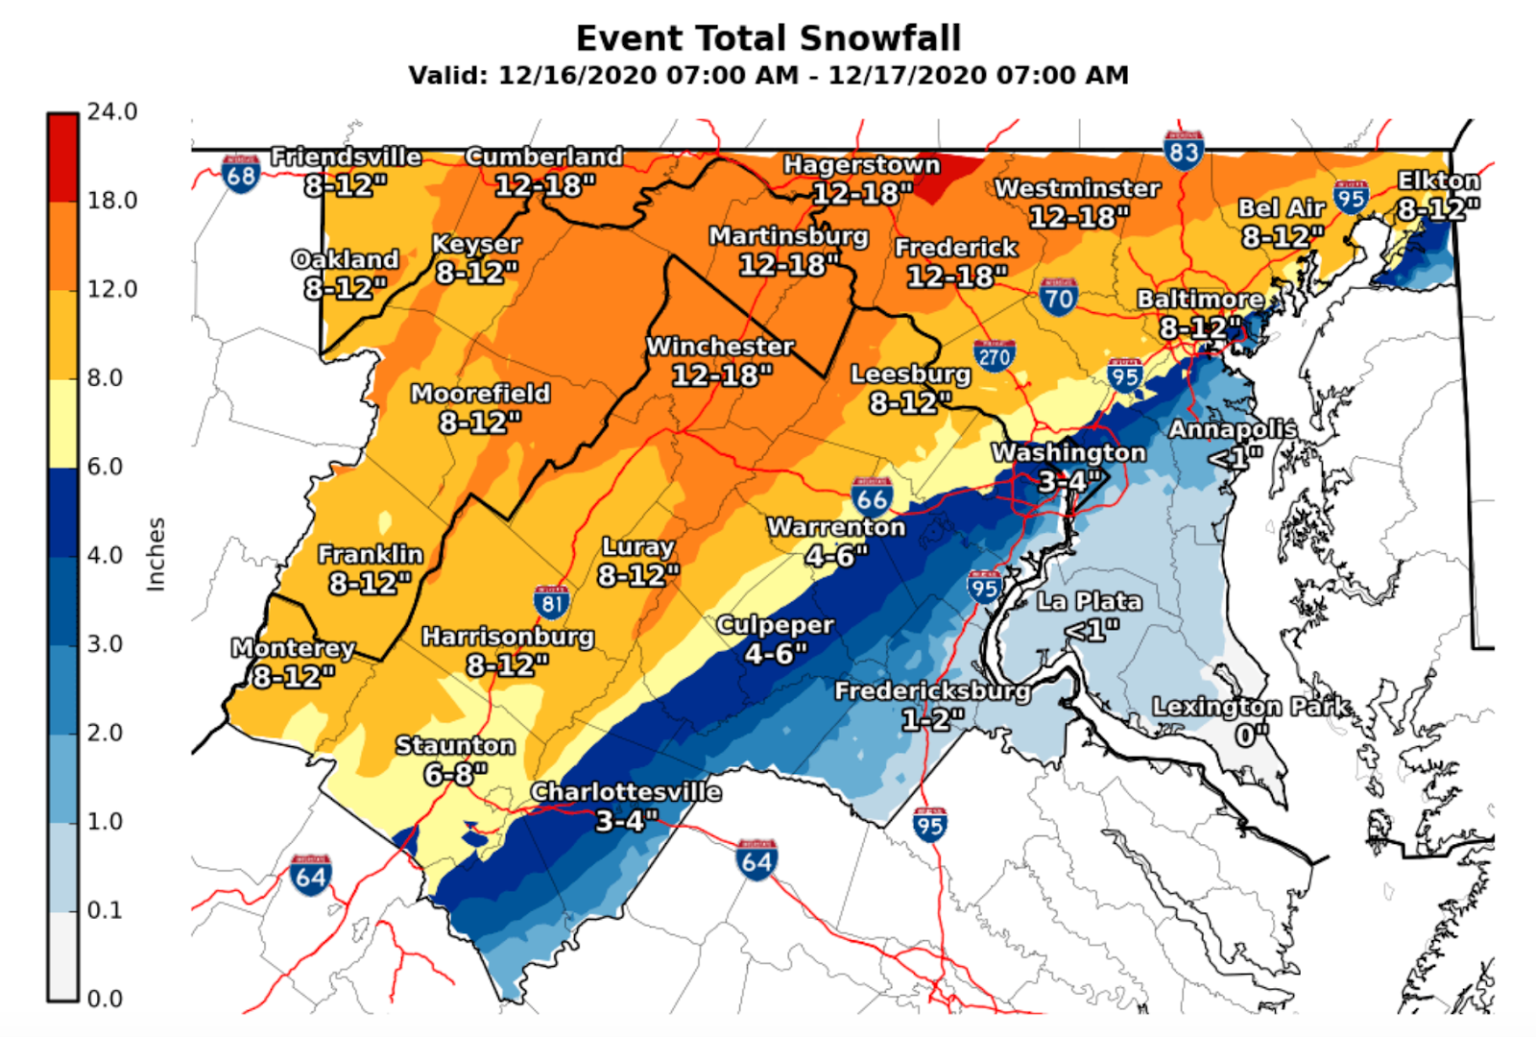 Maryland Announces Statewide Efforts to Prepare for Heavy Snowfall